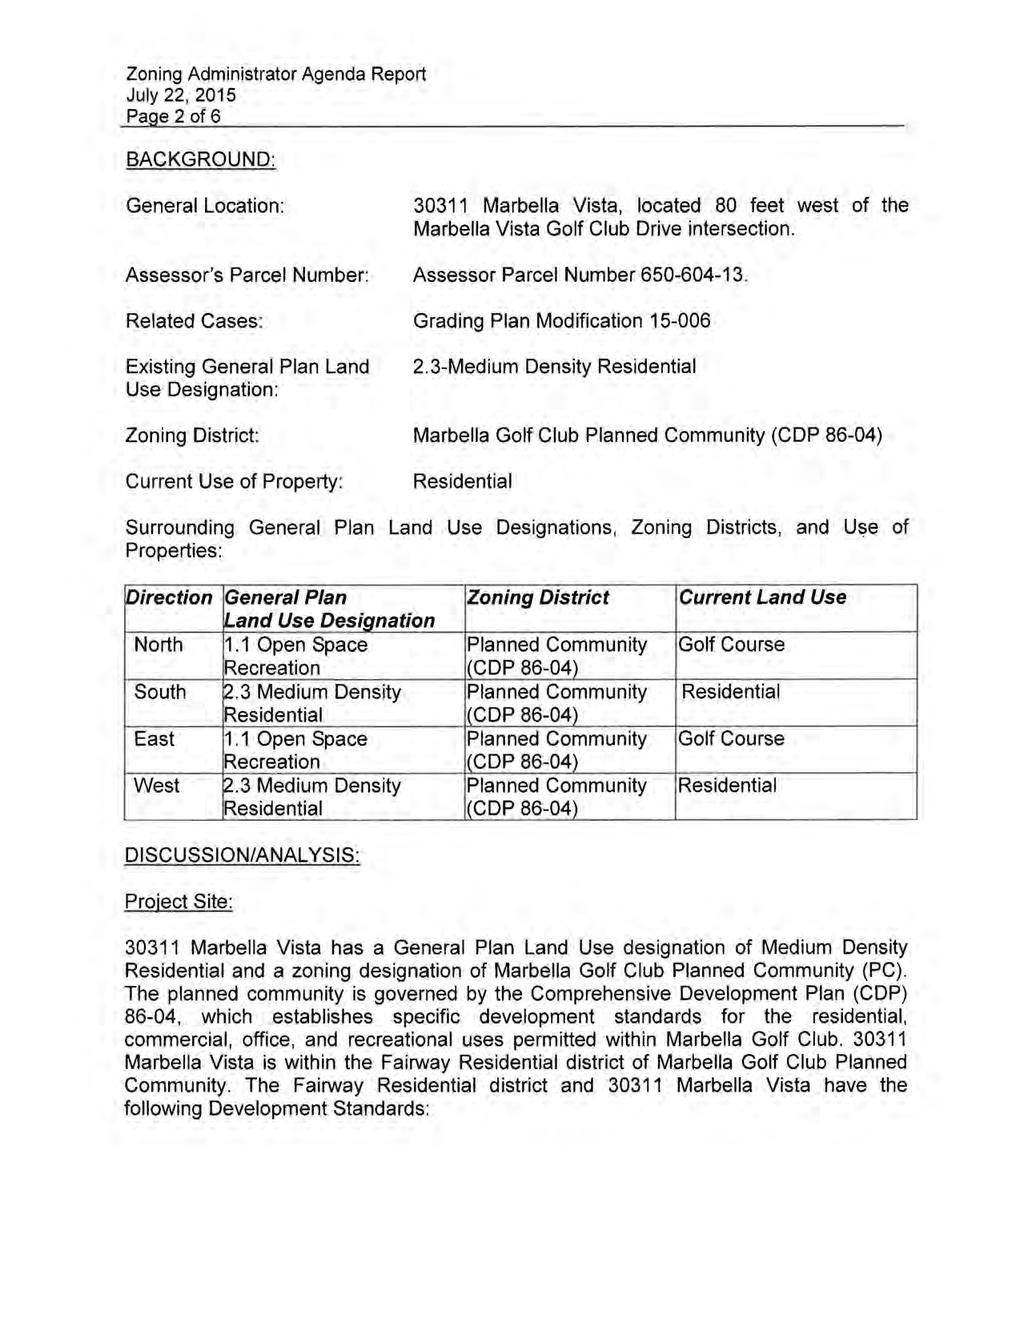 Zoning Administrator Agenda Report July 22, 2015 Page 2 of 6 BACKGROUND: General Location: Assessor's Parcel Number: Related Cases: Existing General Plan Land Use Designation: Zoning District: